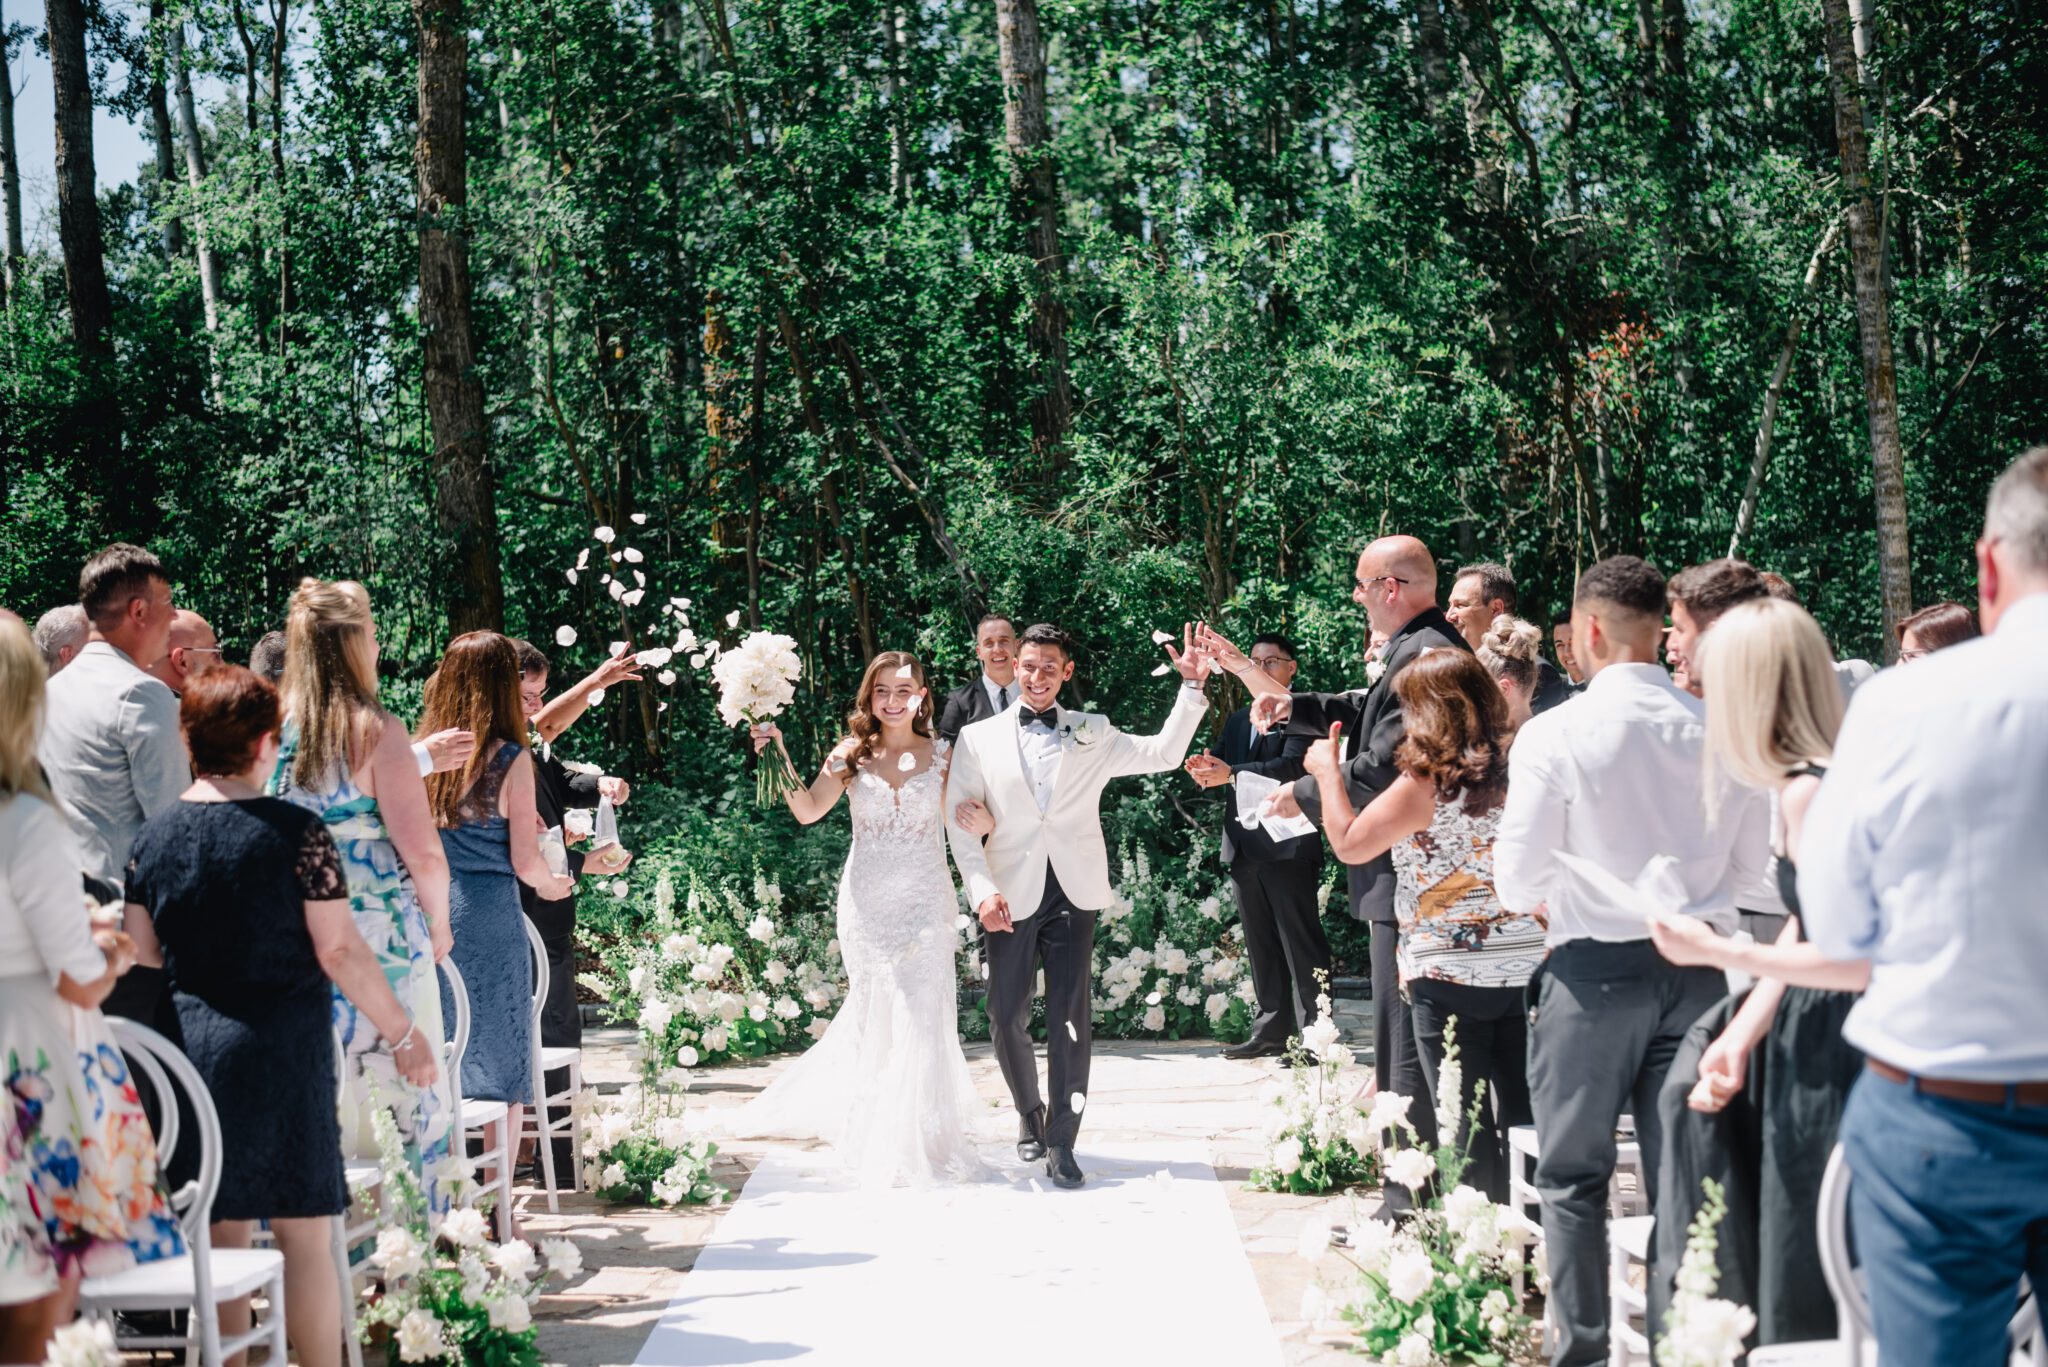 Timeless Summer Wedding at Sparrow Lane Events in Alberta. Classic colour palette of white, blush, and green wedding inspiration. 